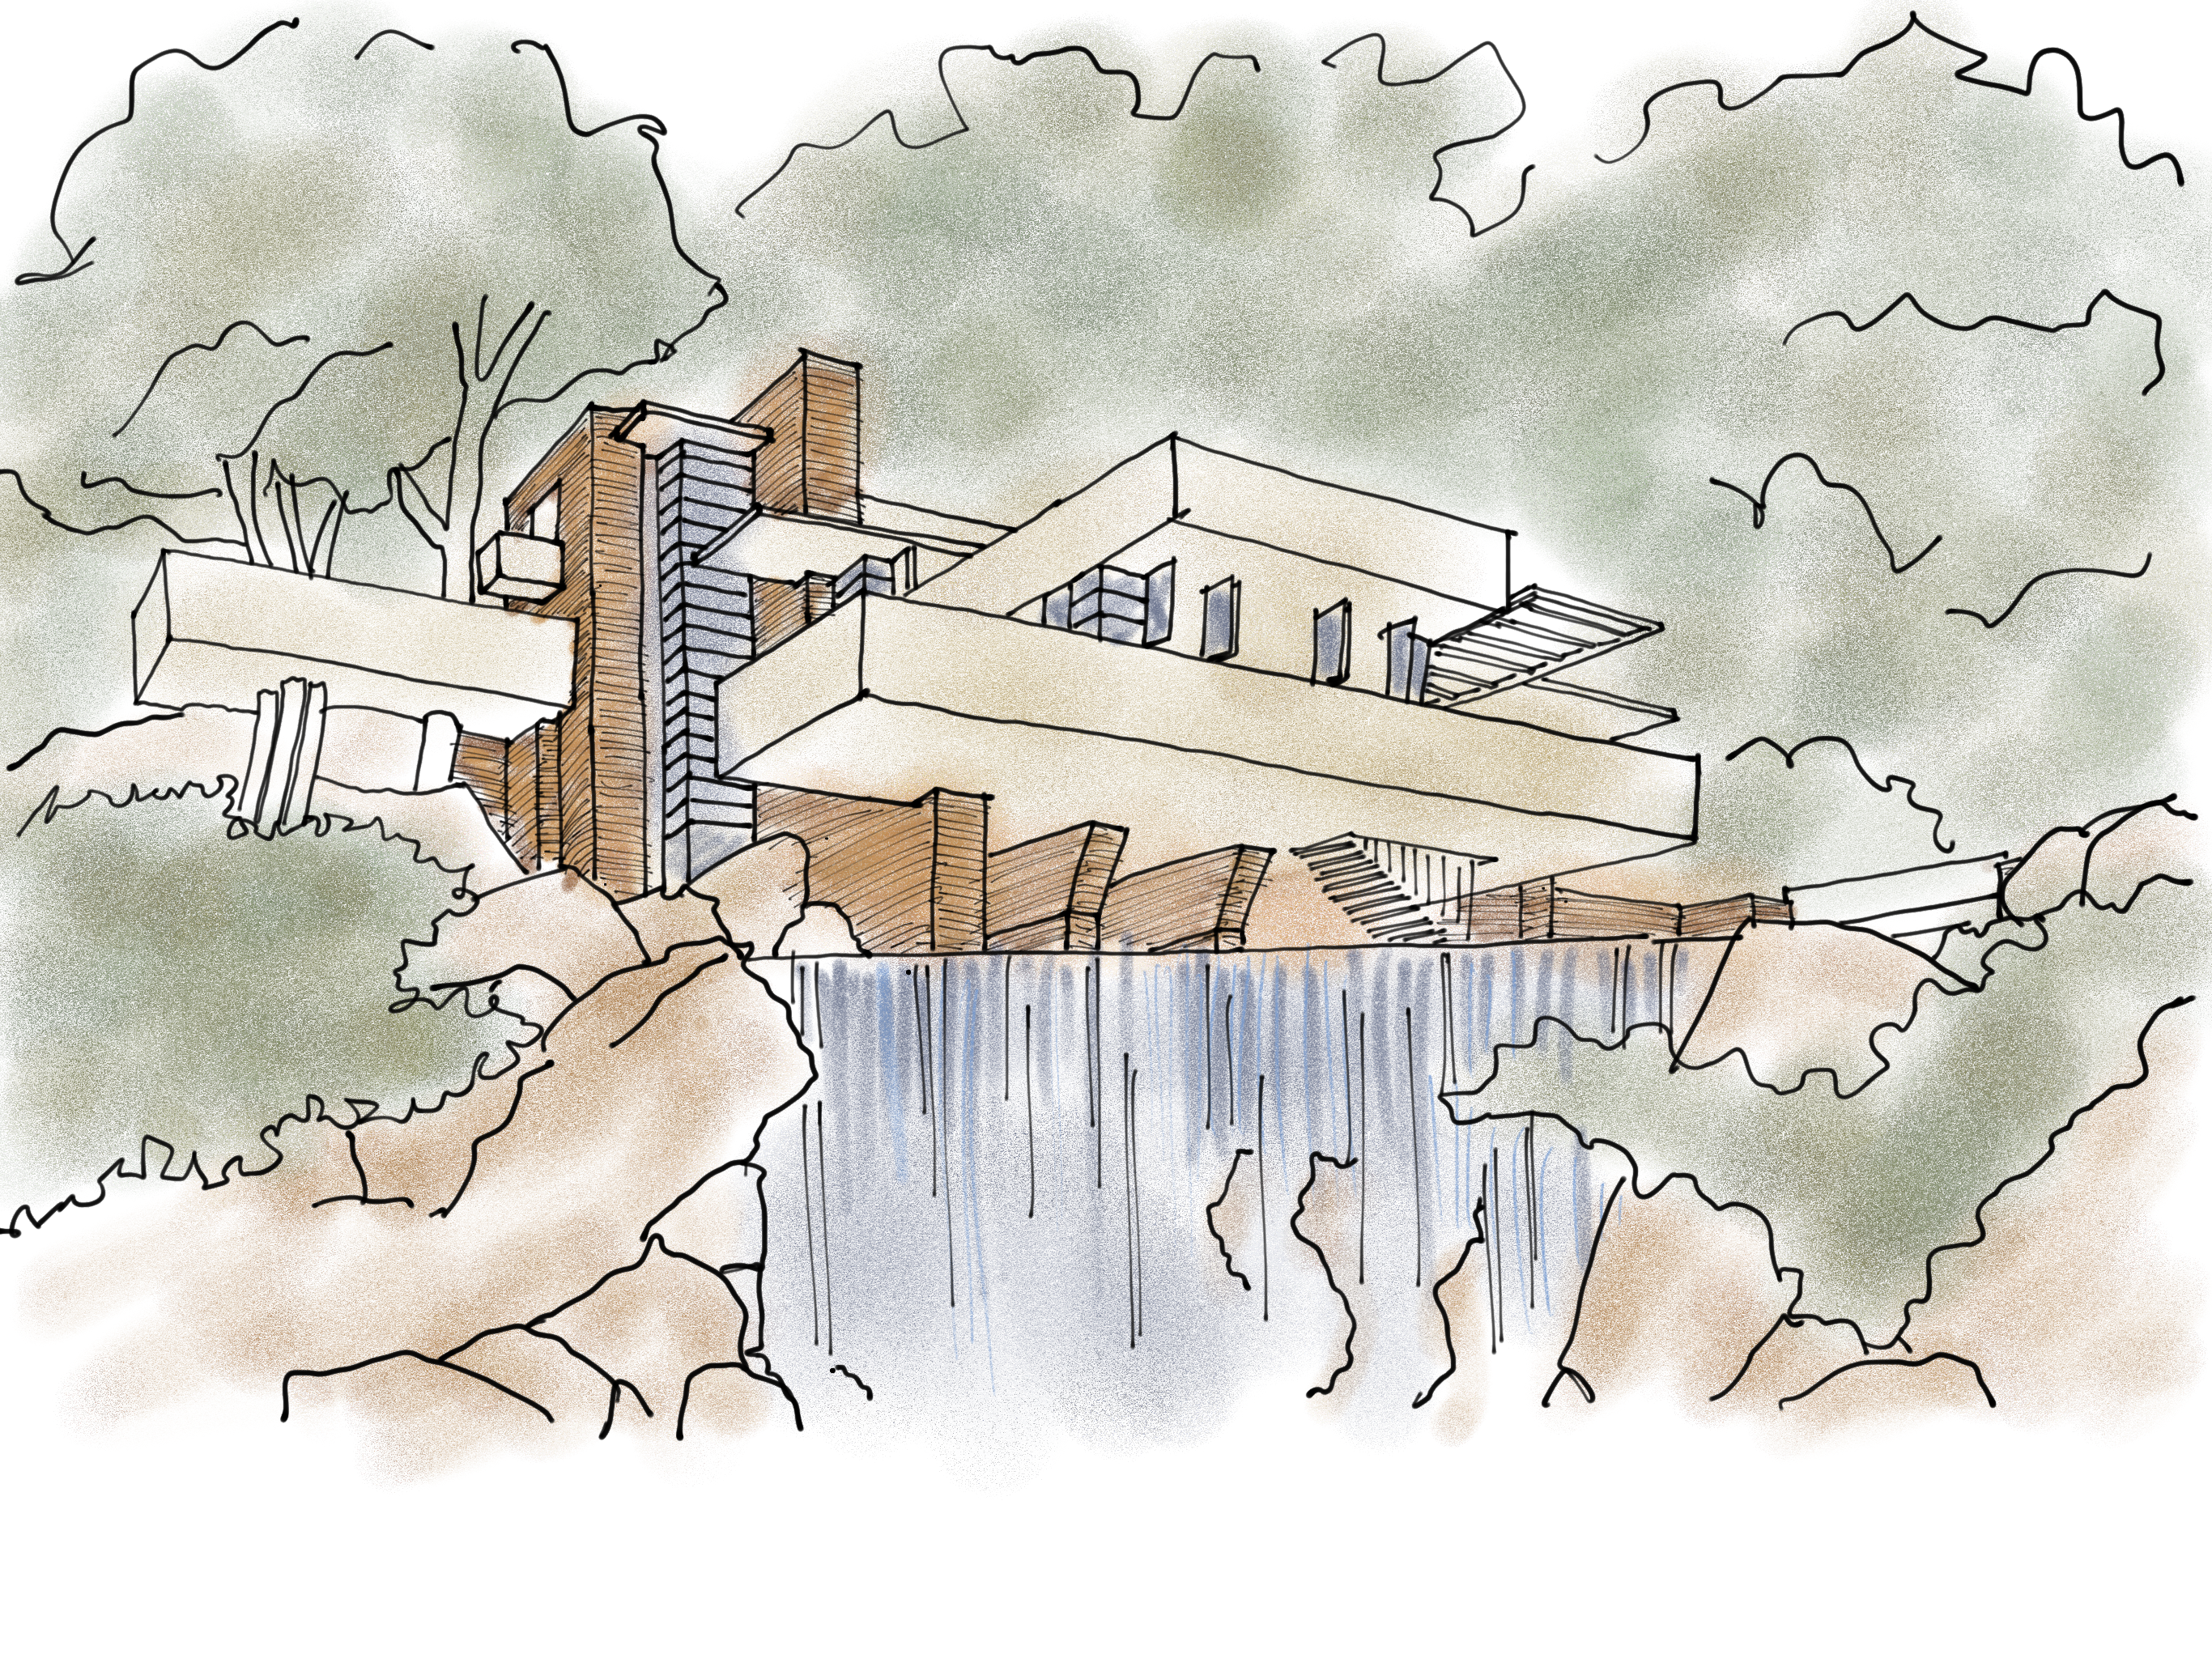 A graphic illustration of the Fallingwater house by architect Frank Lloyd Wright.